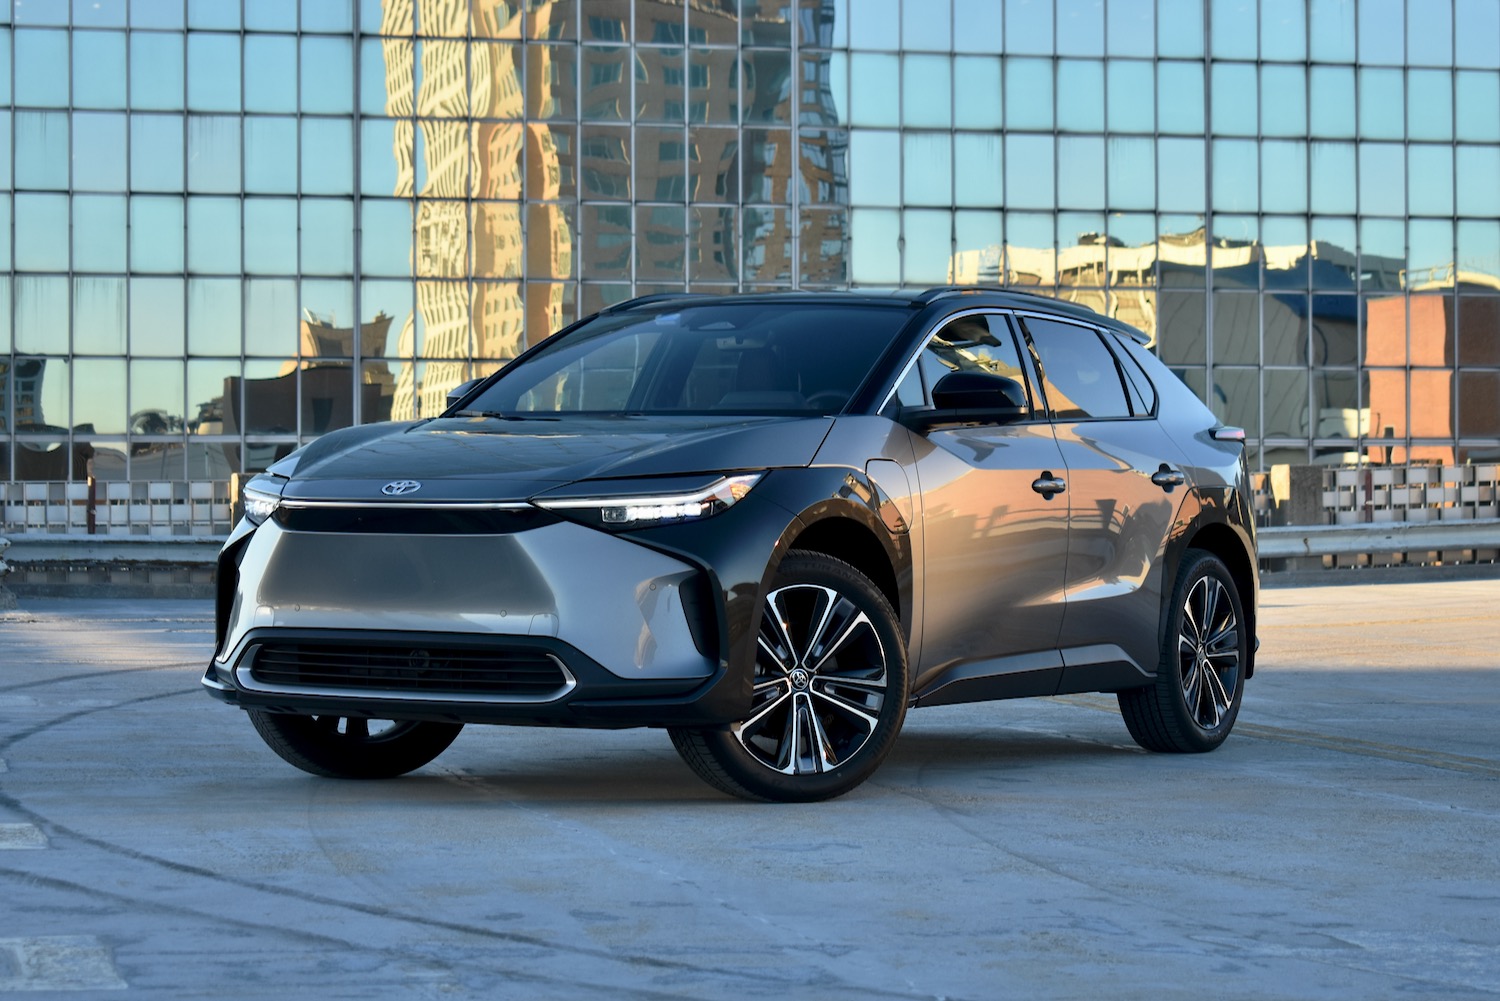 2023 Toyota BZ4X Is a Smooth, Comfortable Electric SUV - CNET